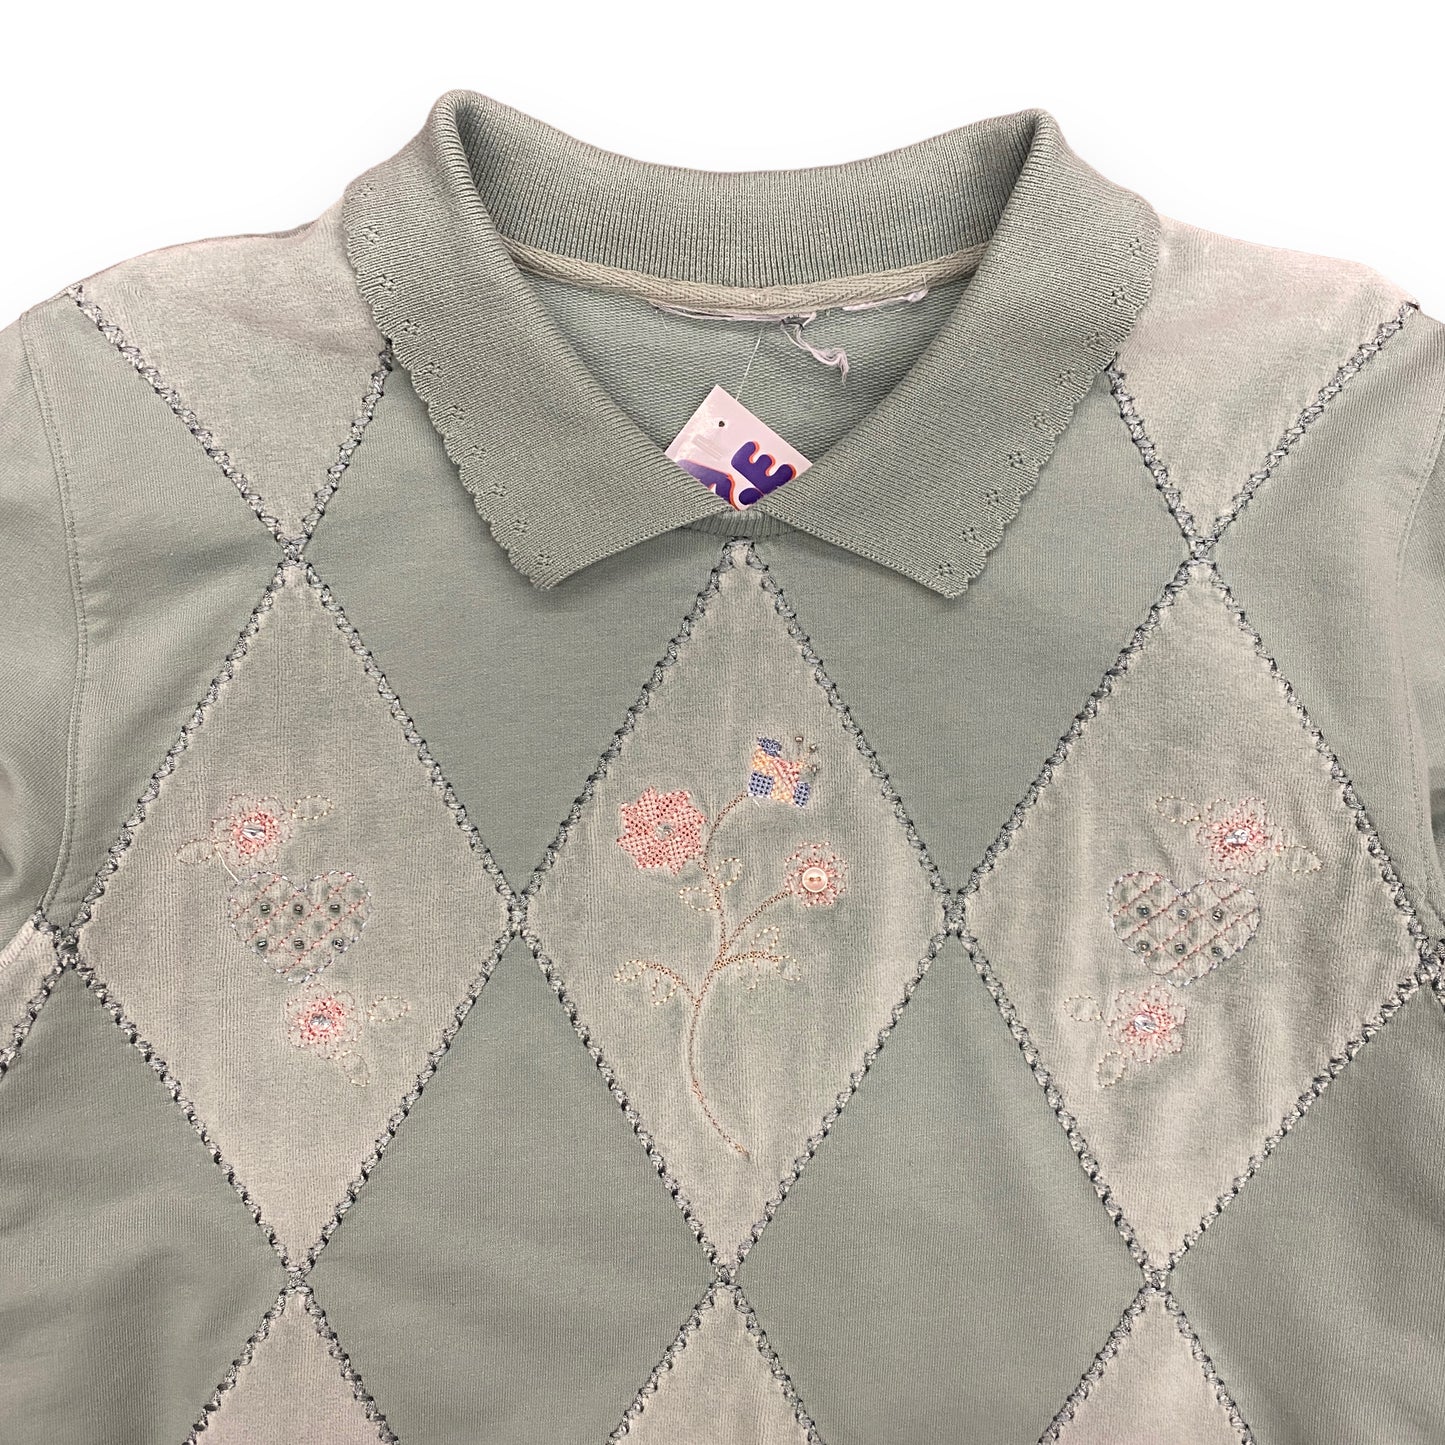 1990s Floral Quilted Collared Sweatshirt - Size Small